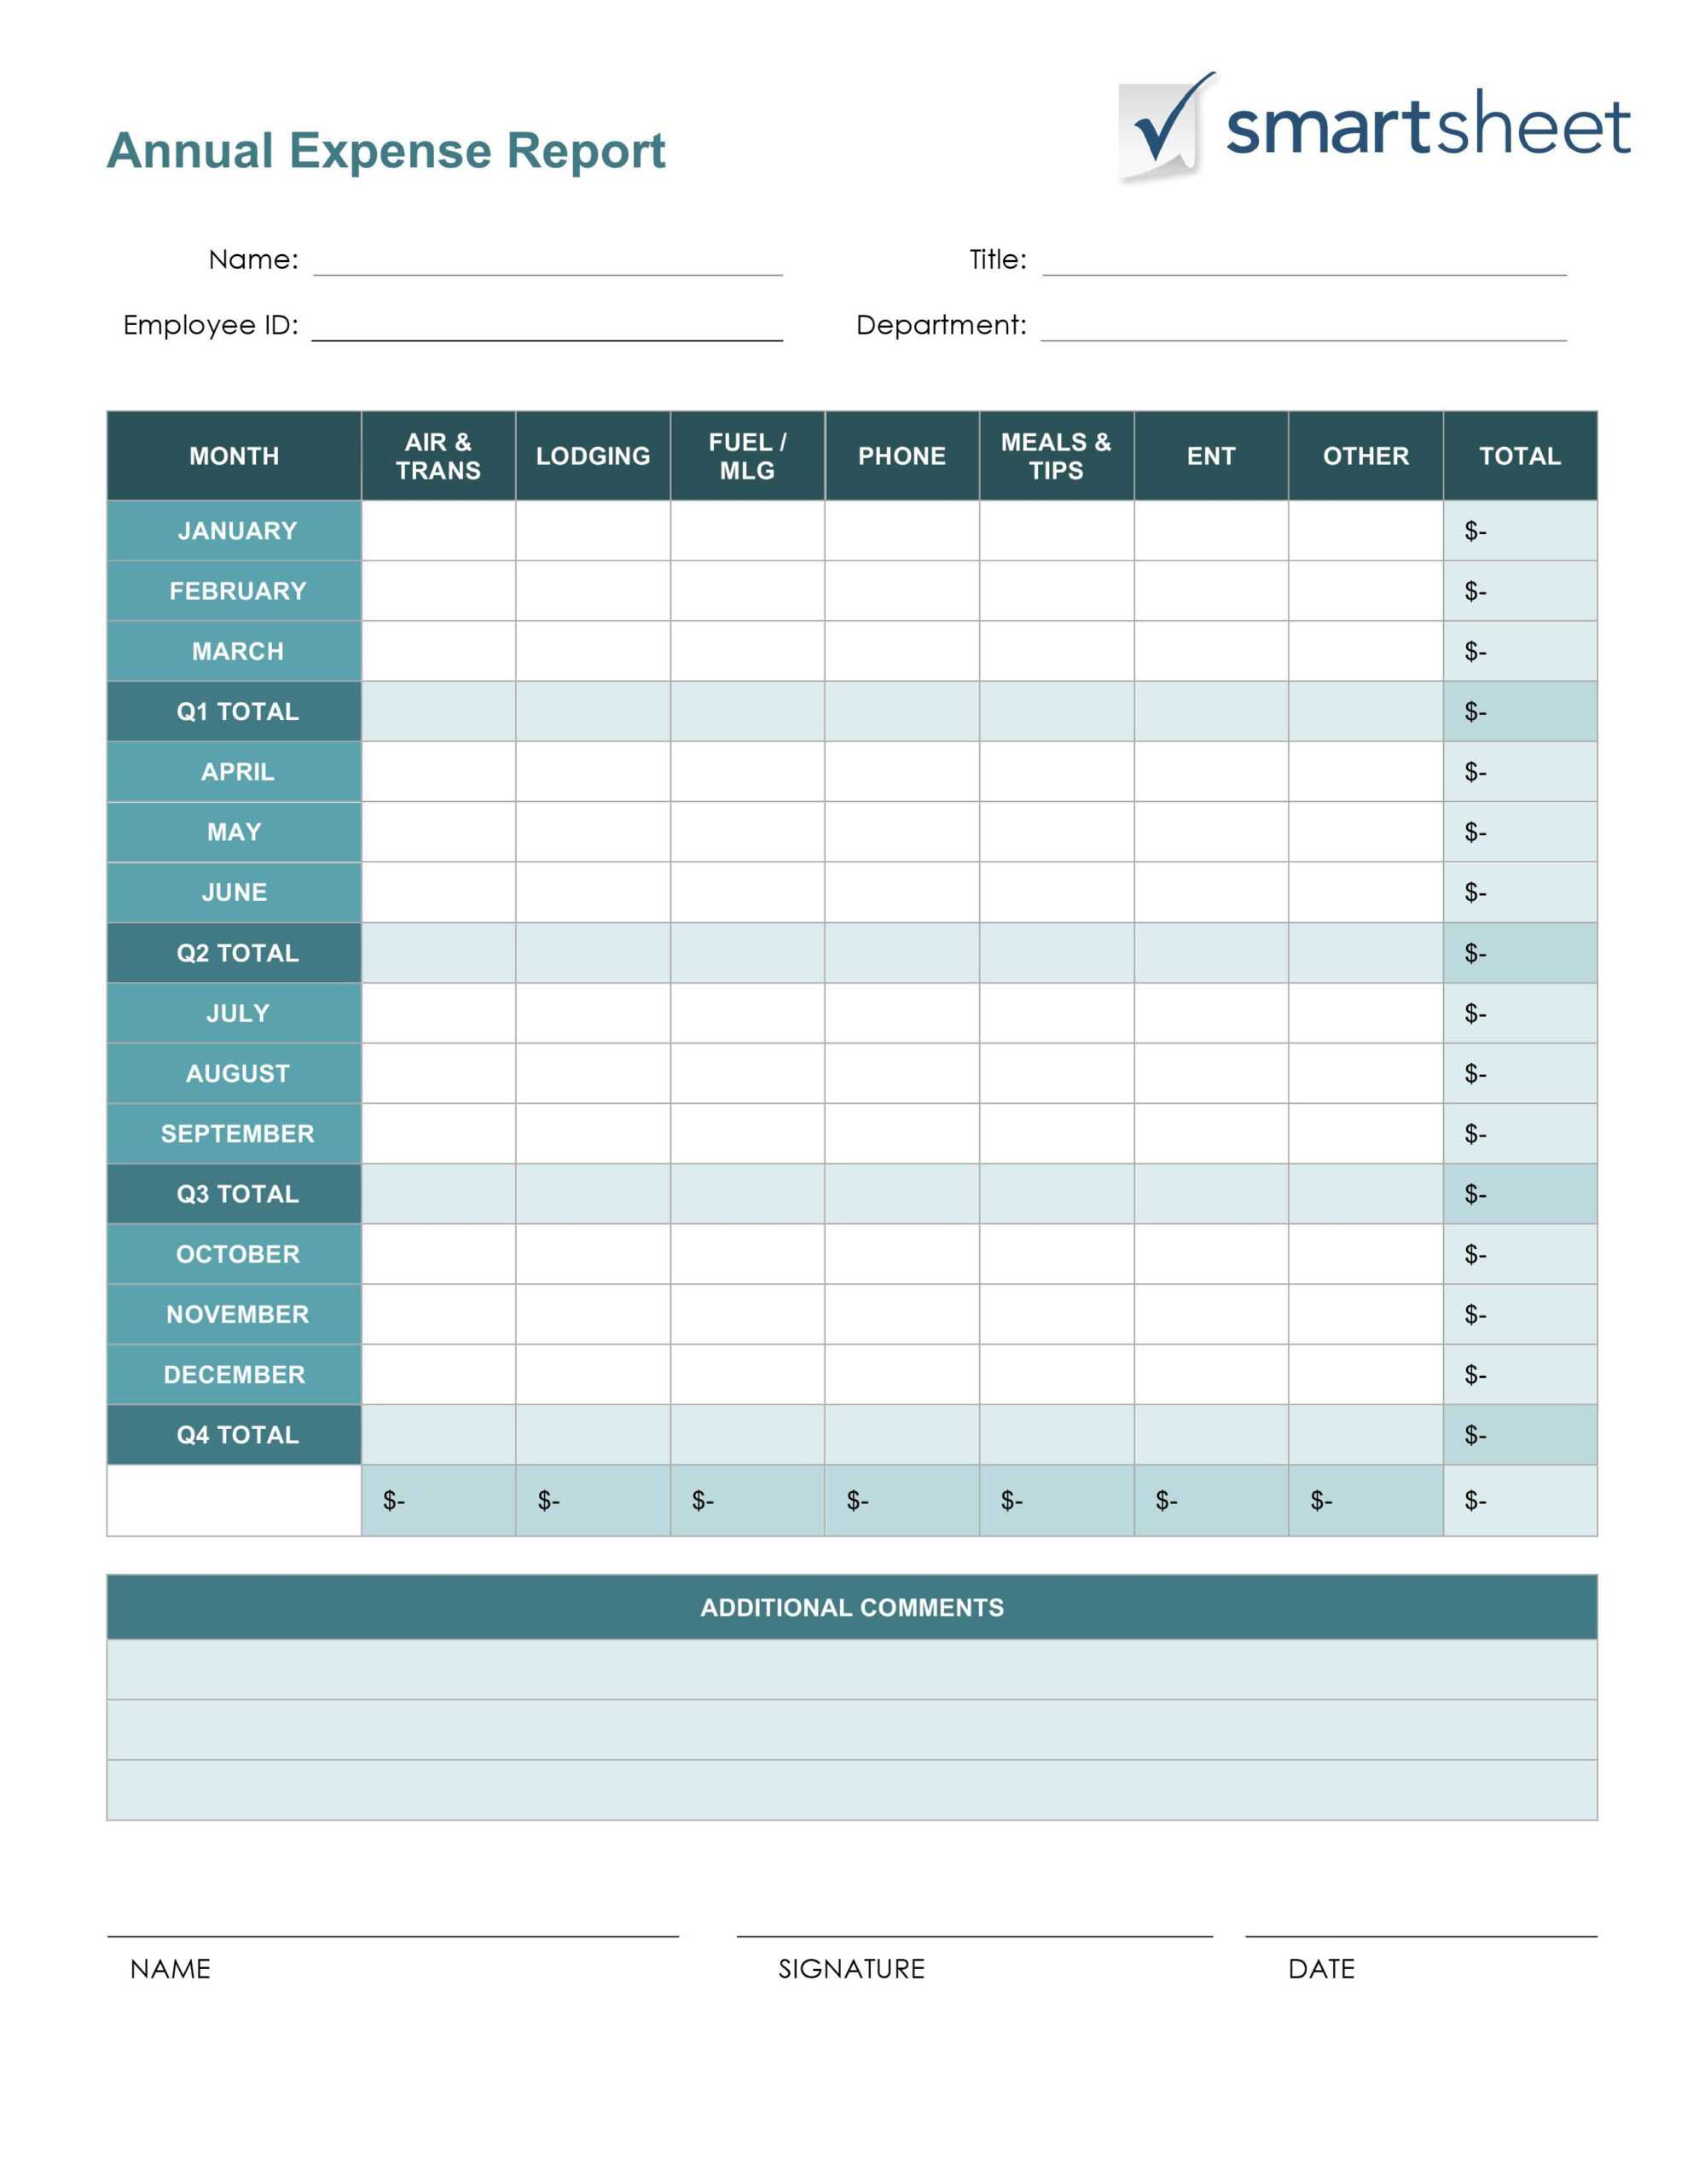 002 Monthly Expense Report Template Ideas Fantastic Format With Regard To Quarterly Expense Report Template